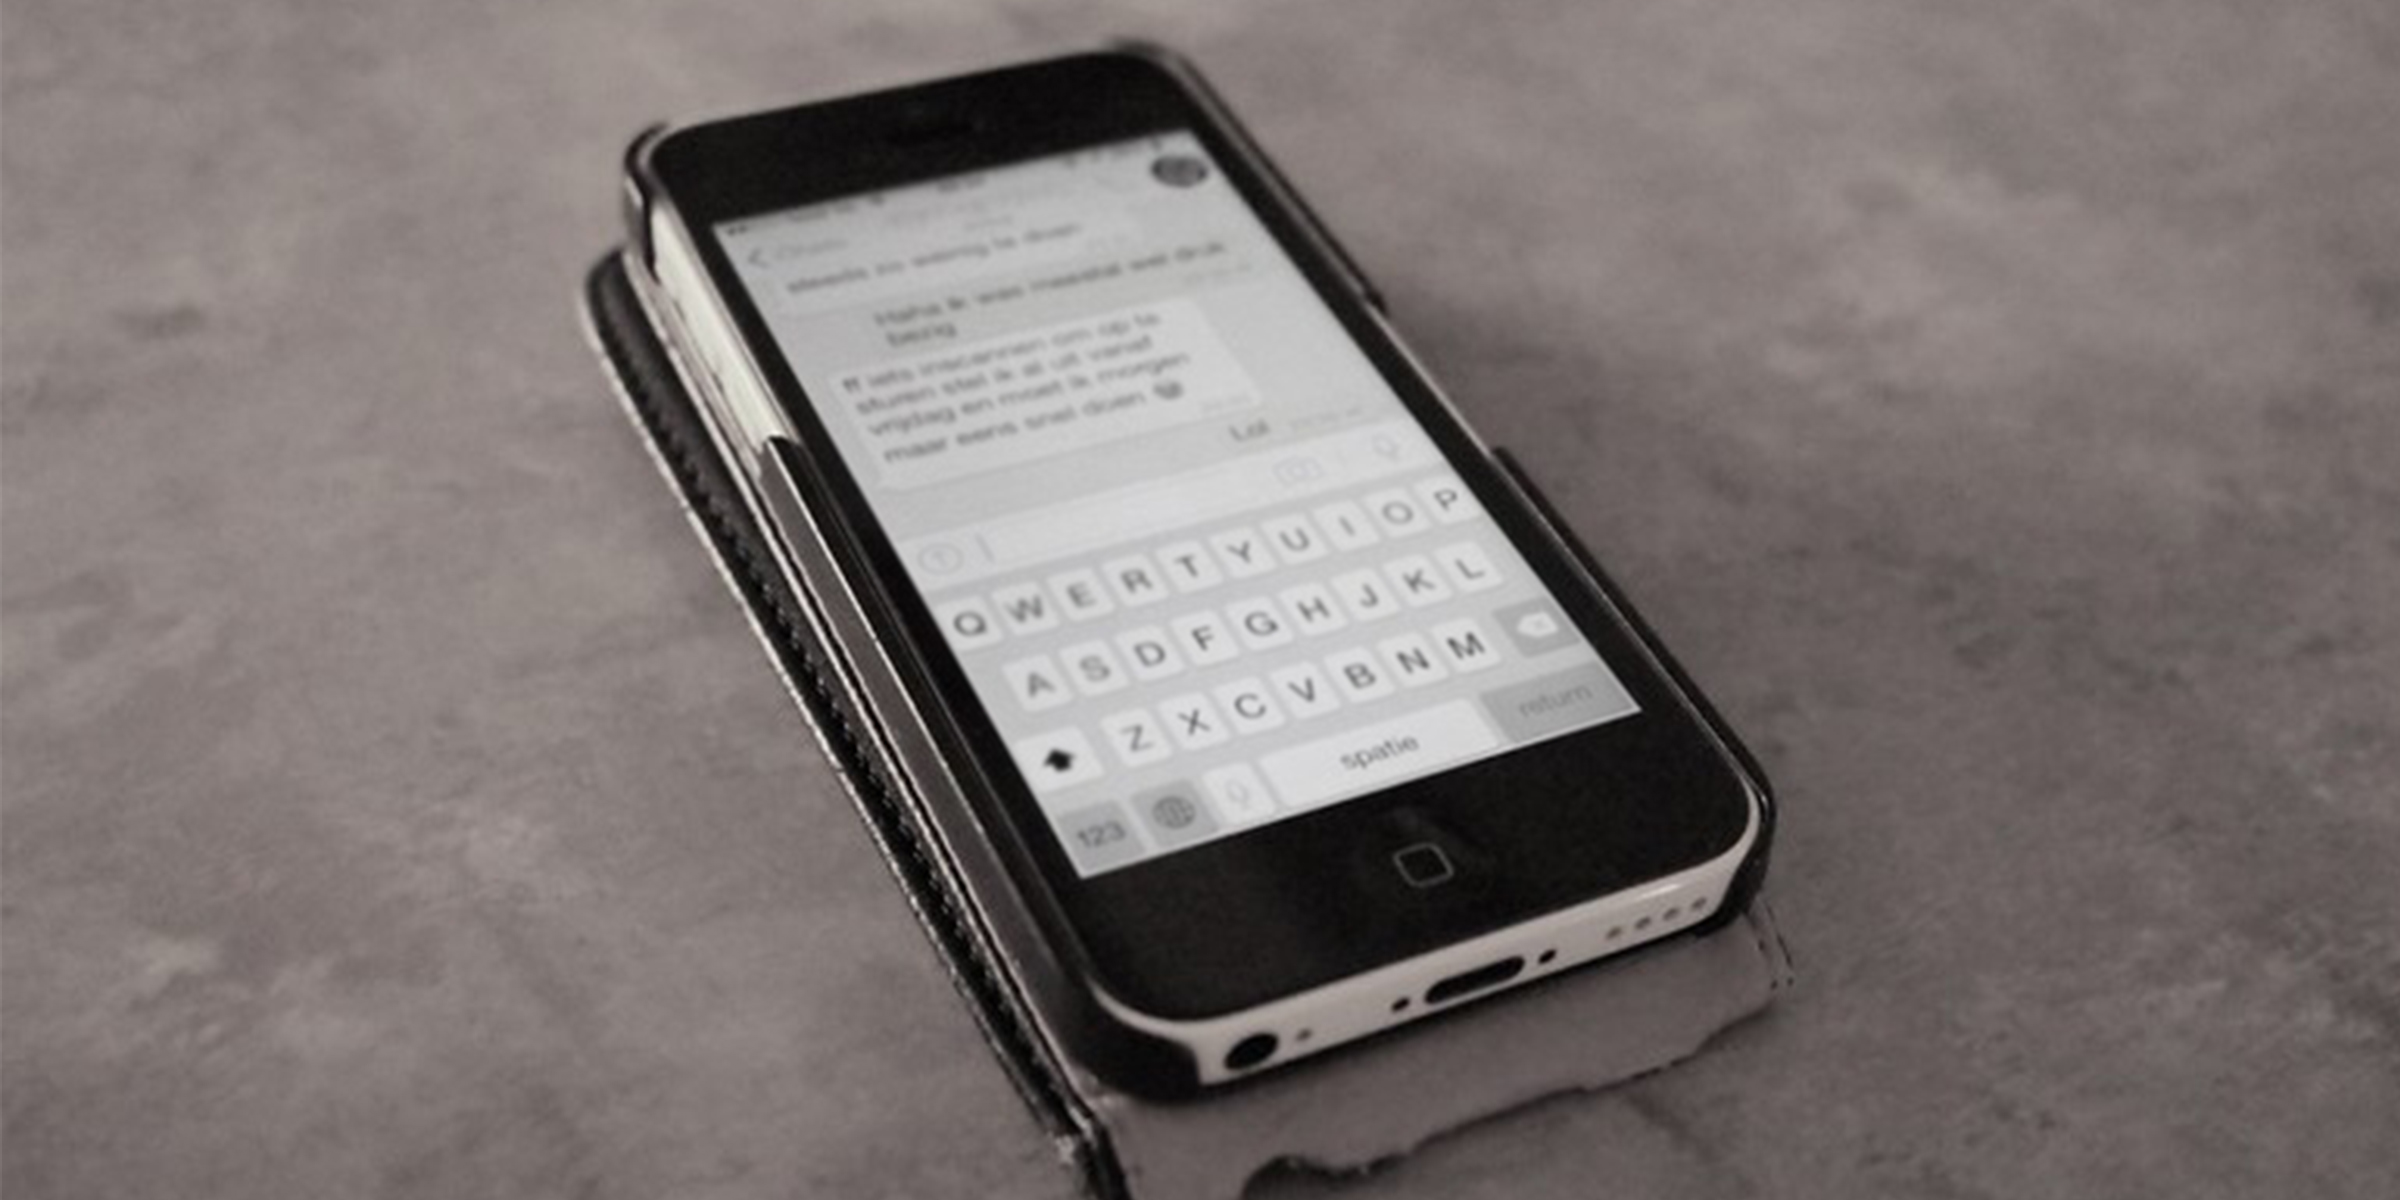 Text messages on a mobile phone | Source: Flickr/StockyPics/Public Domain